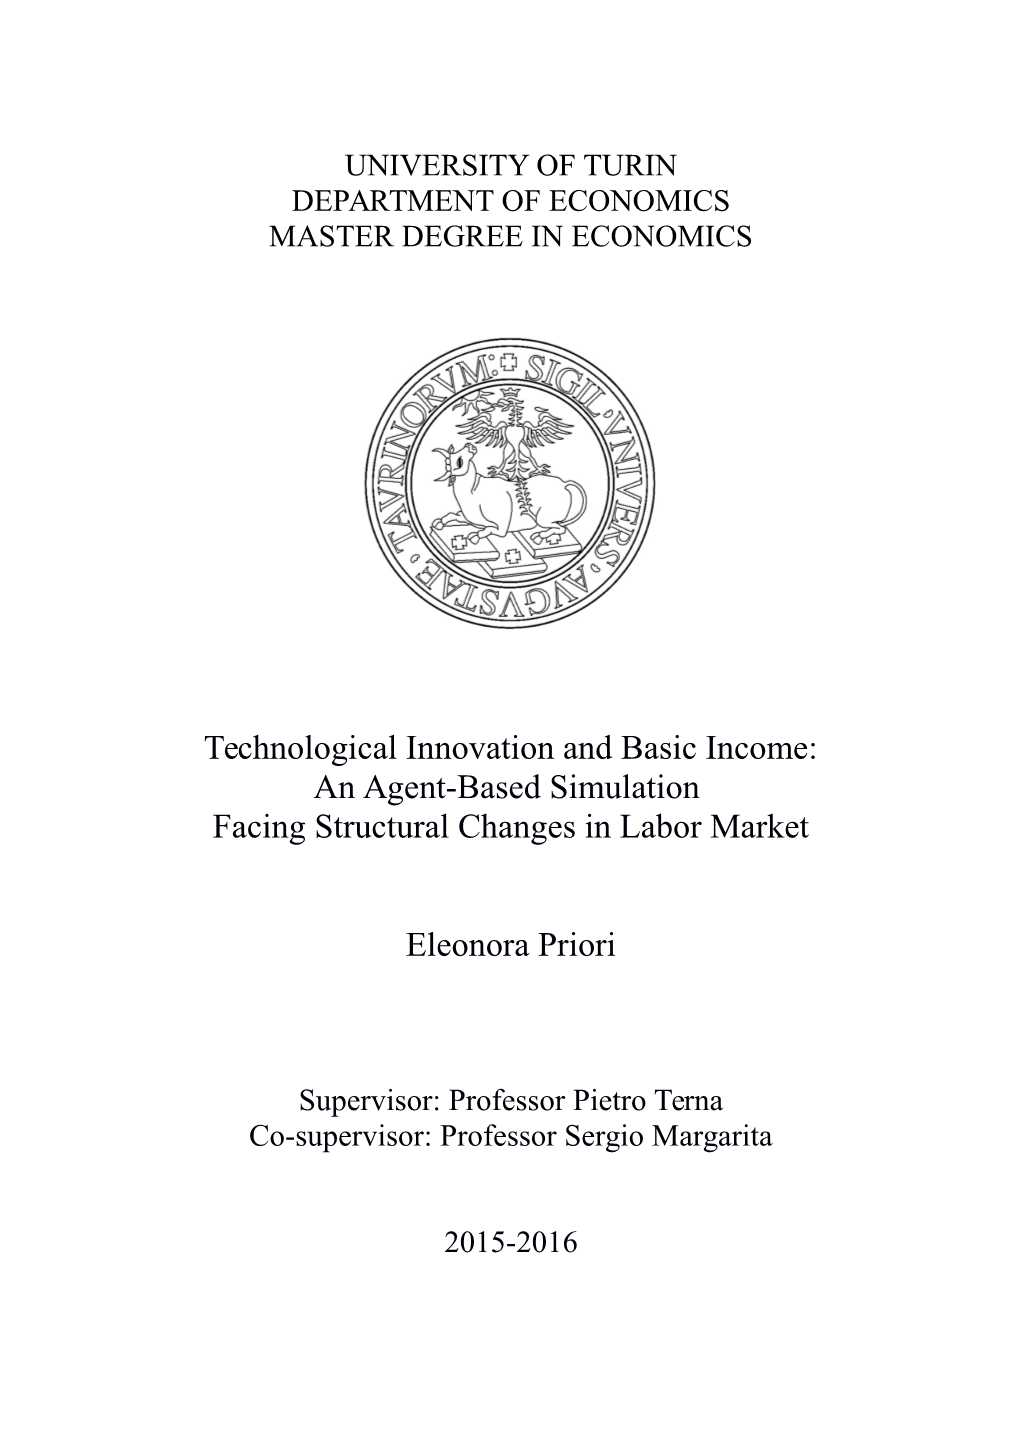 Technological Innovation and Basic Income: an Agent-Based Simulation Facing Structural Changes in Labor Market